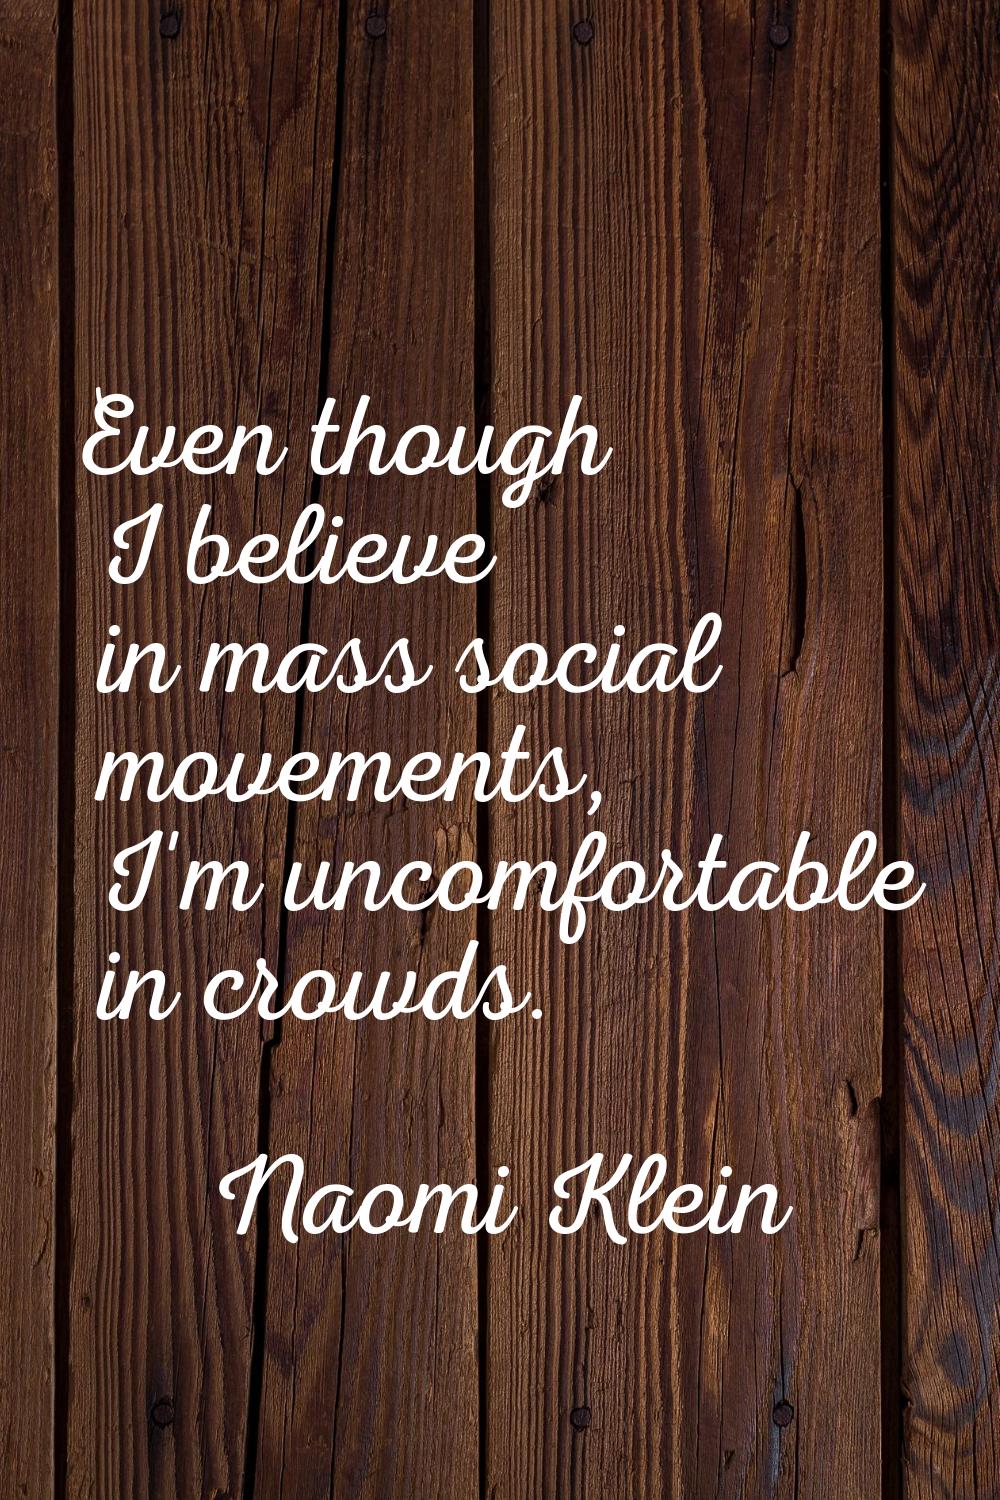 Even though I believe in mass social movements, I'm uncomfortable in crowds.